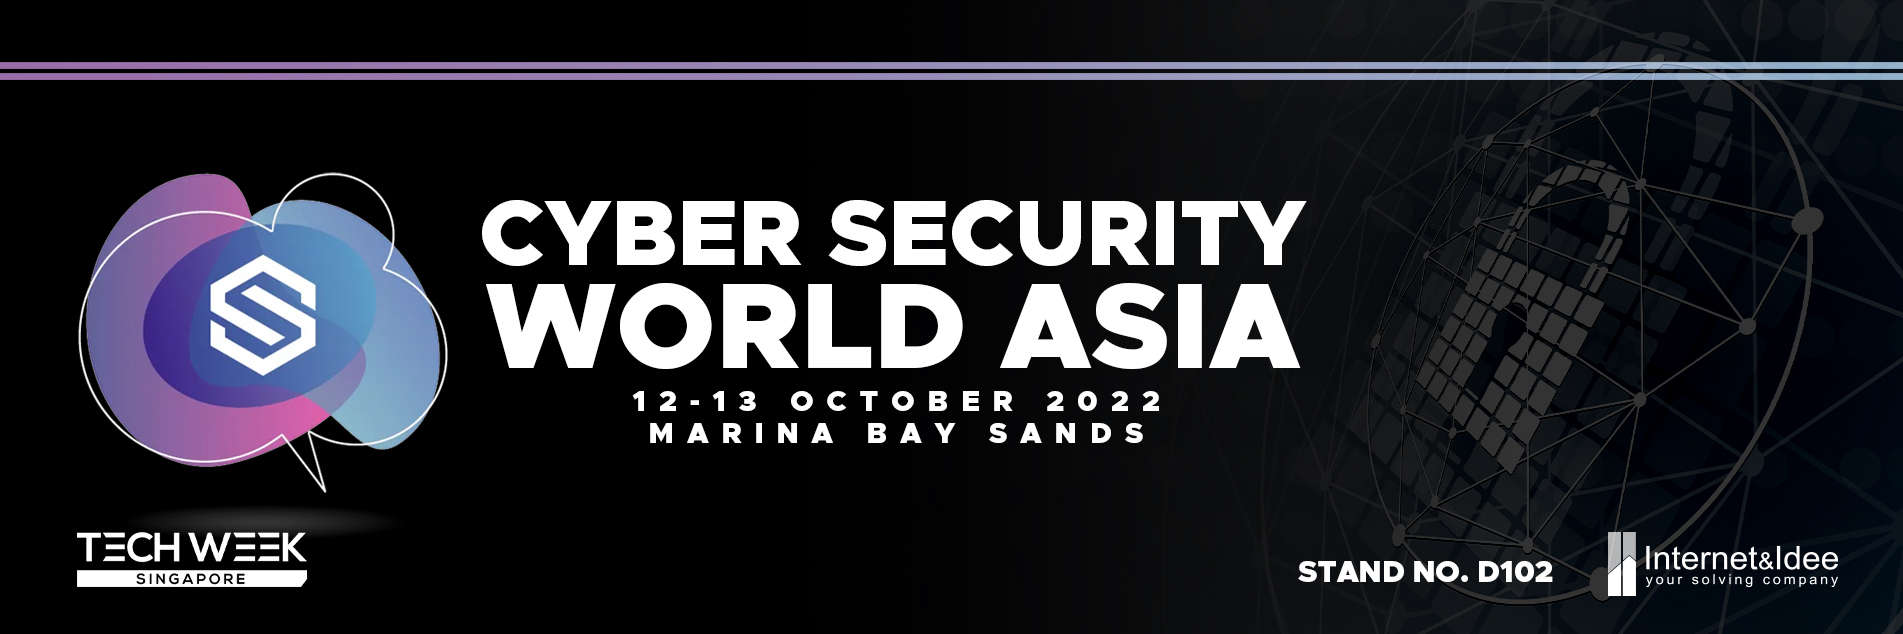 Cyber Security World Asia: I&I will participate in the Singapore Tech Week